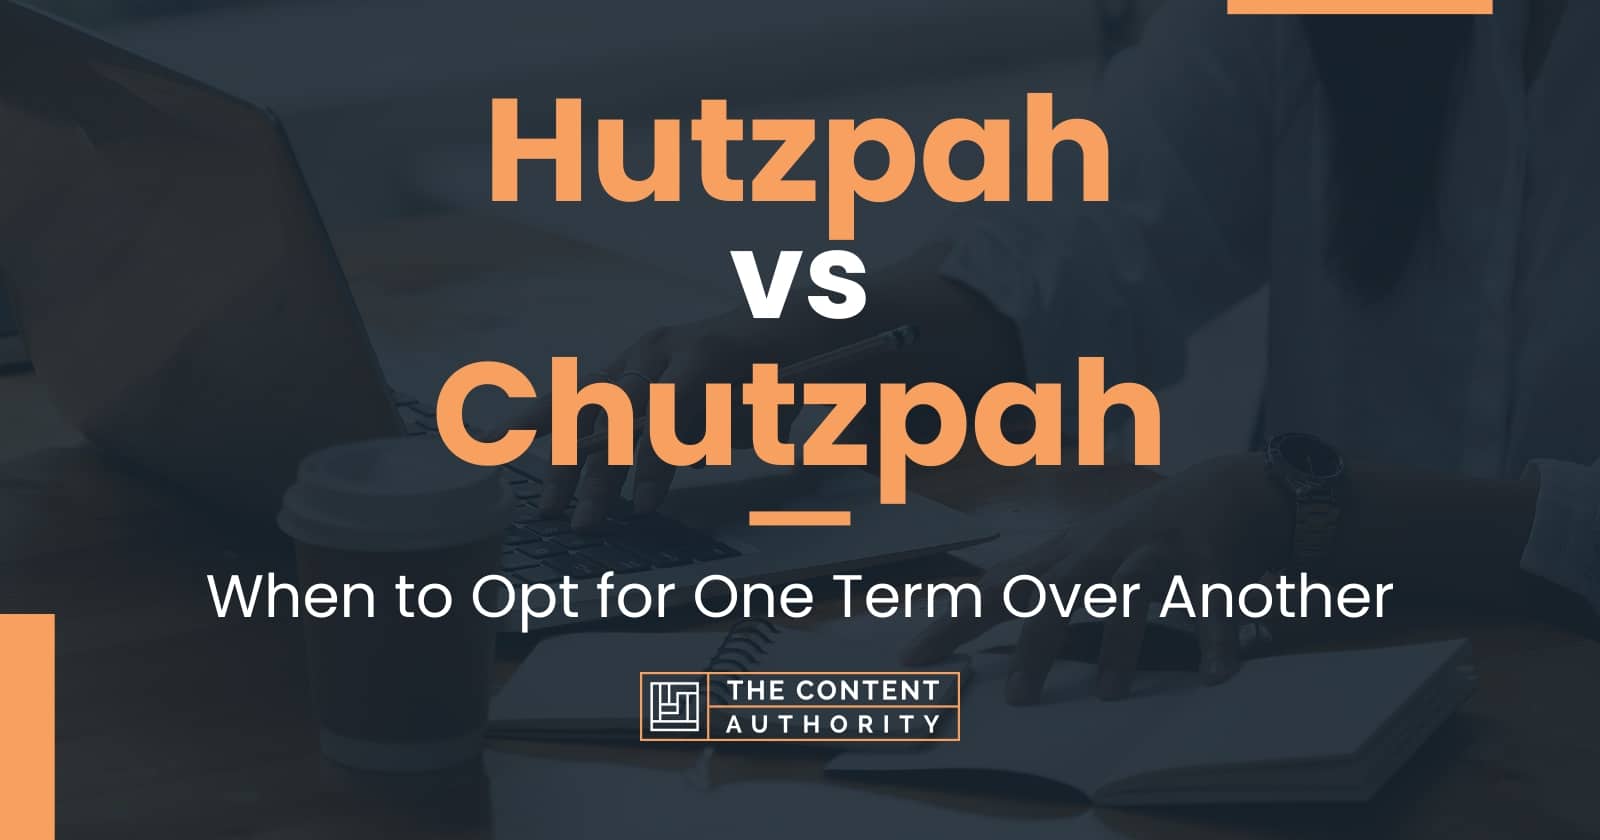 Chutzpah Definition & Meaning - The Origins And Connotations